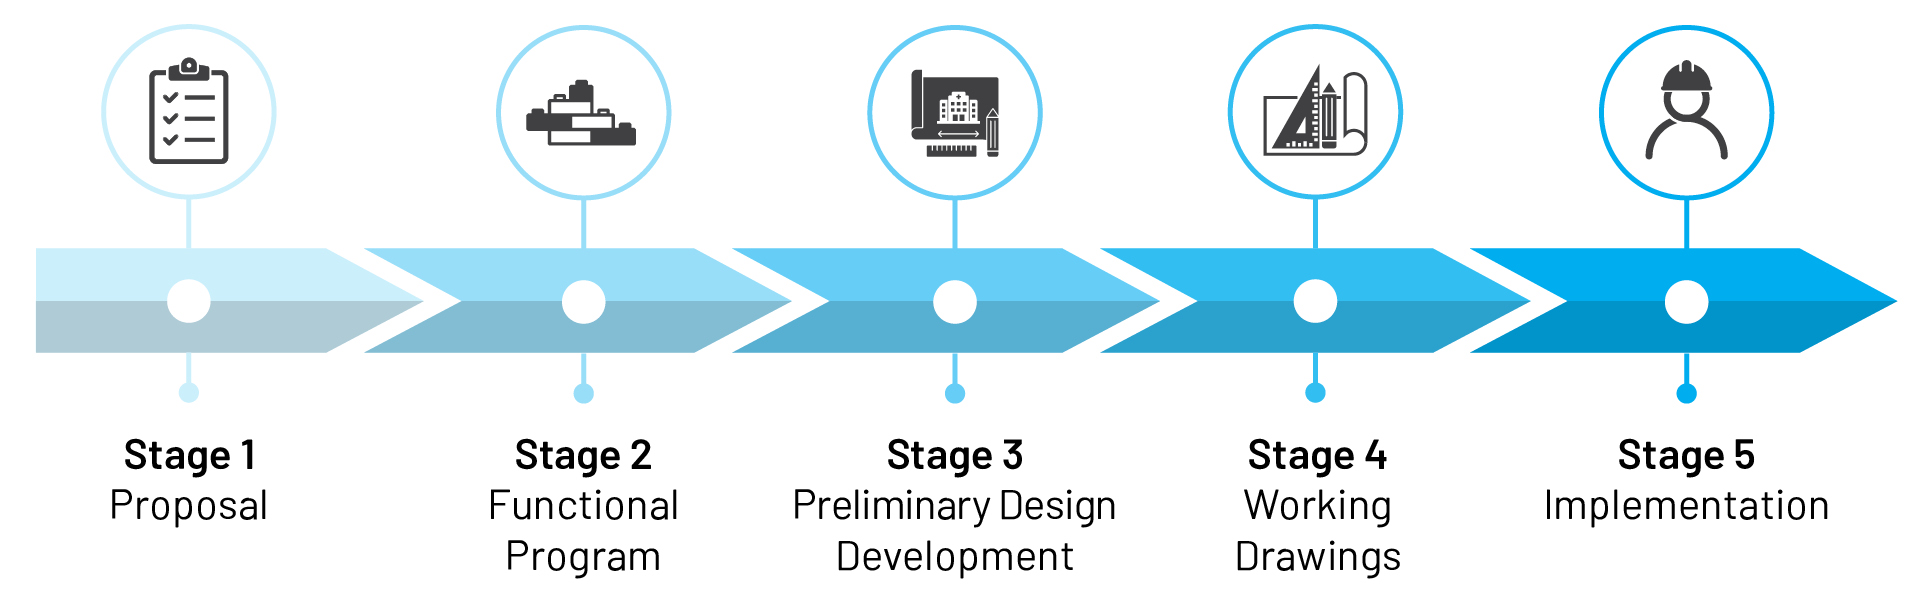 Timeline with icons: Stage 1: Proposal, Stage 2: Functional Program, Stage 3: Preliminary Design Development, Stage 4: Working Drawings, Stage 5: Implementation